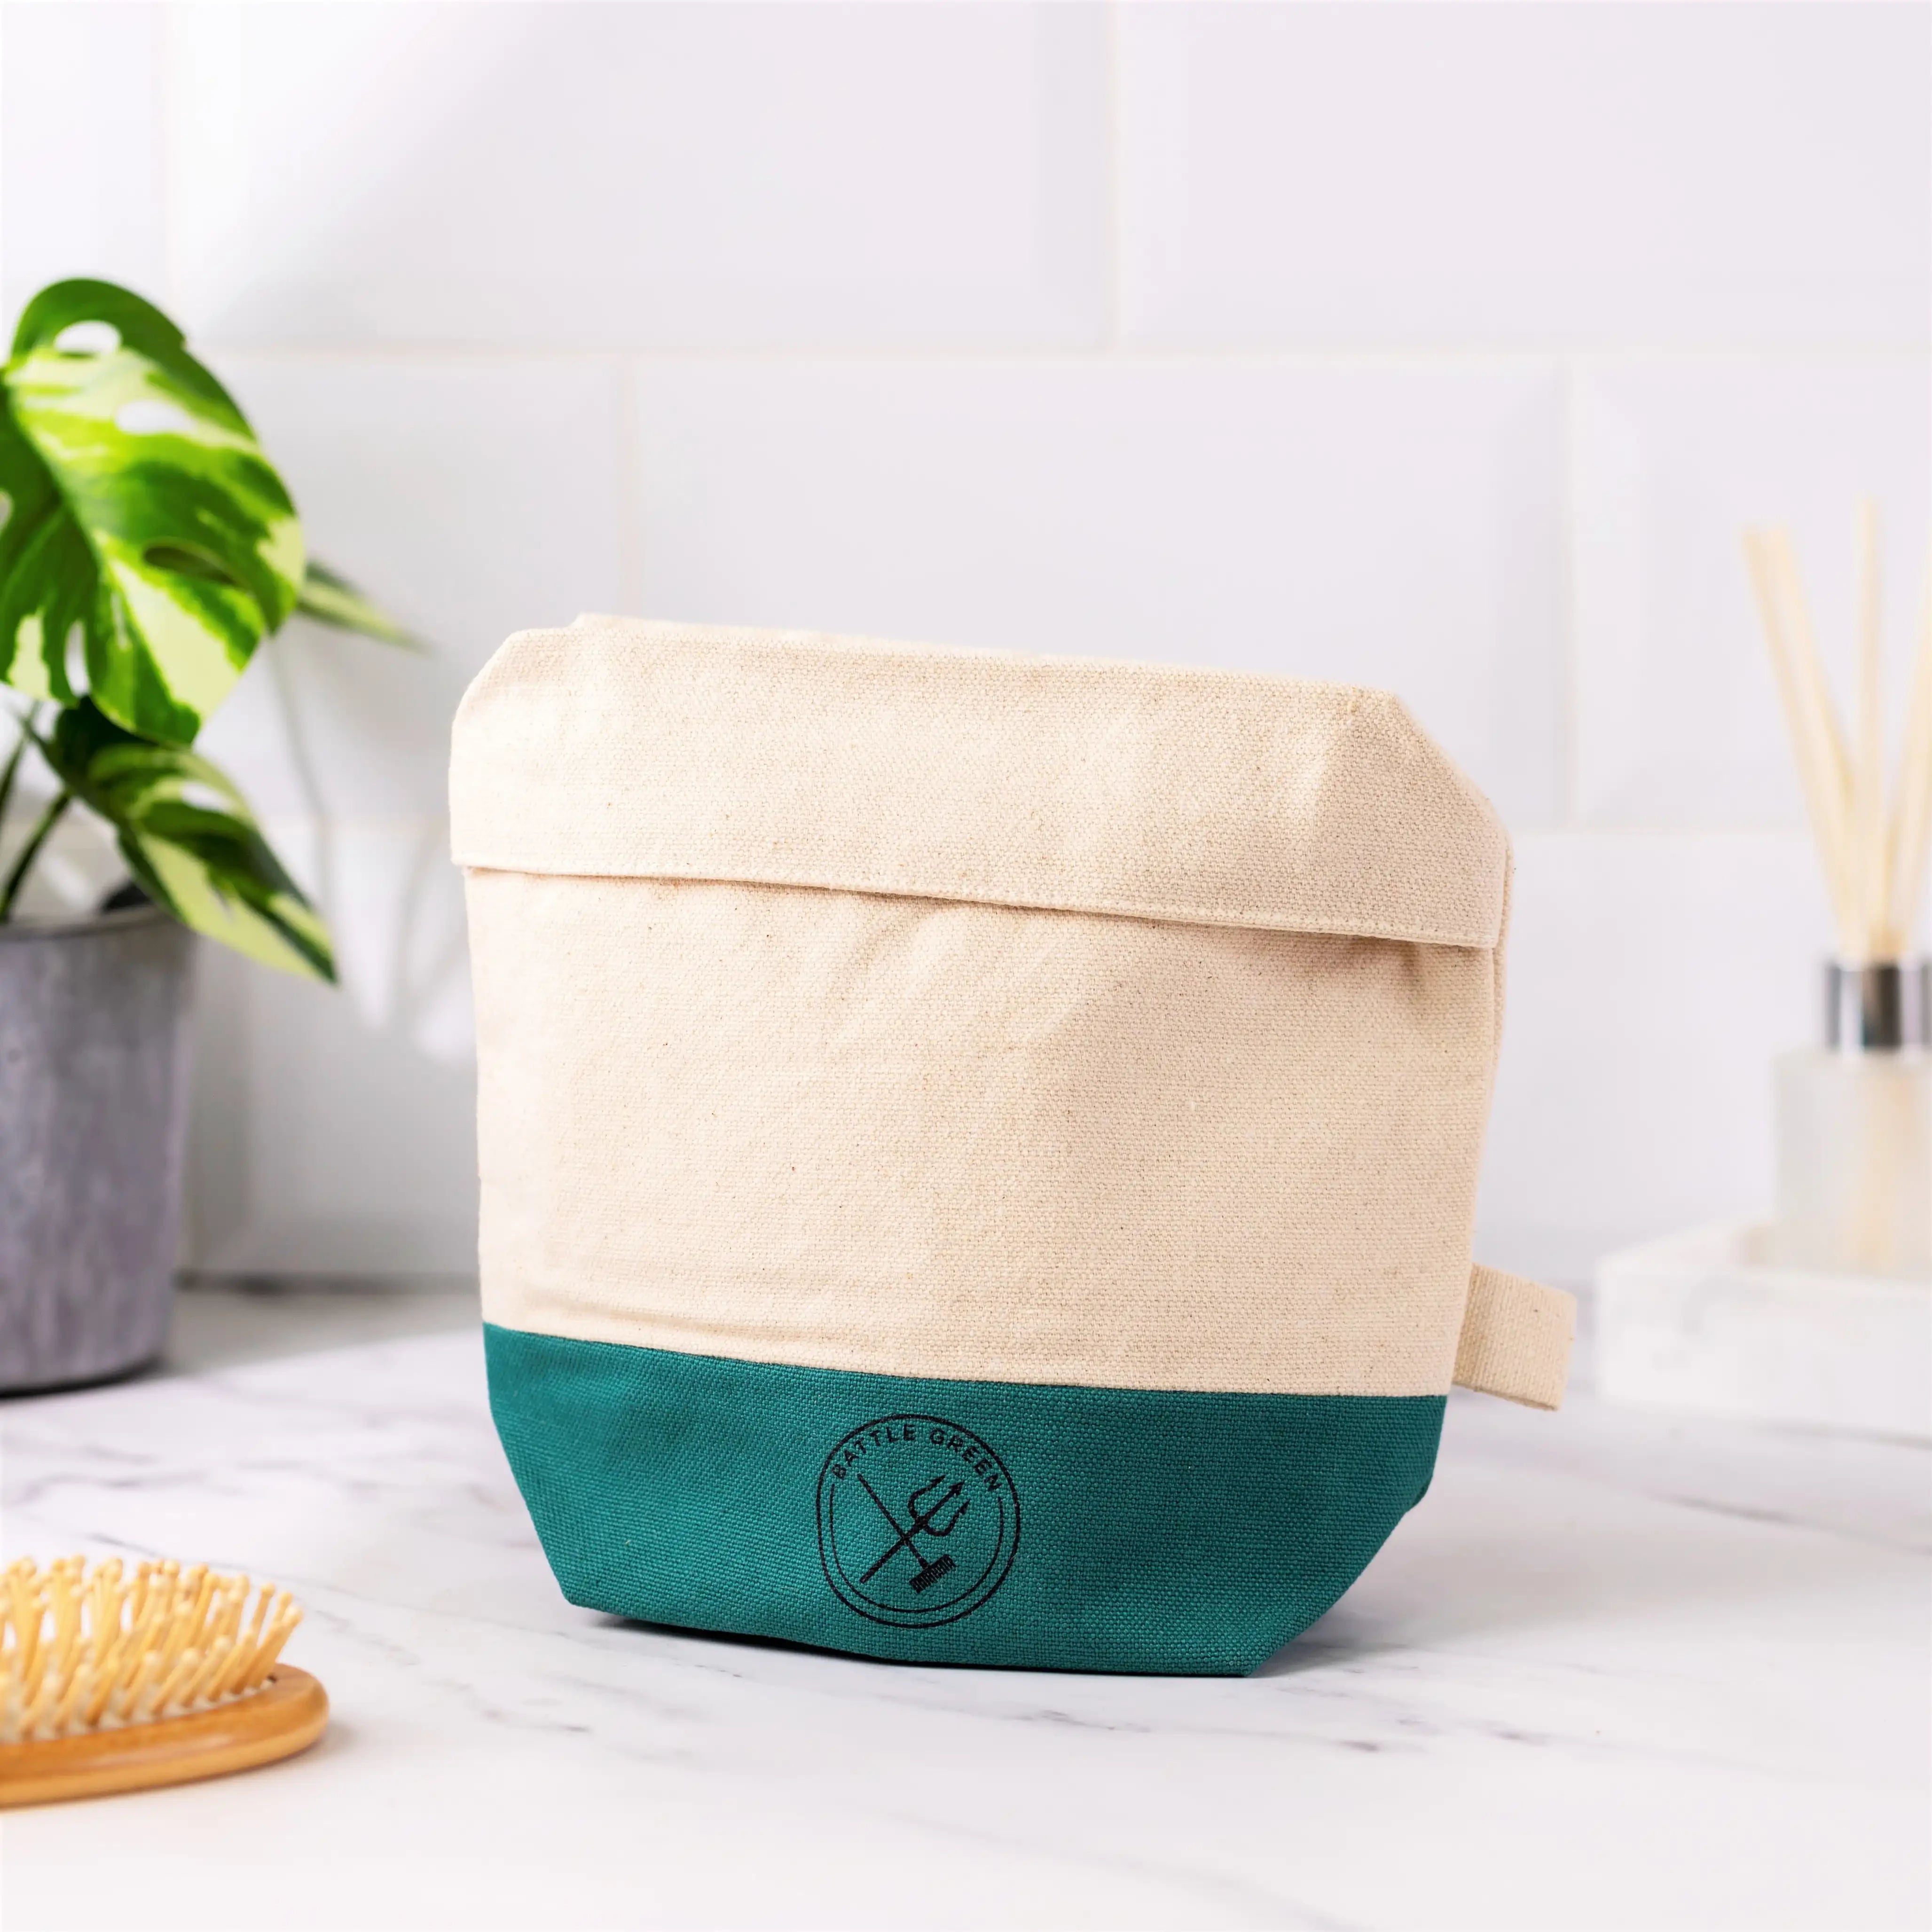 Deluxe Natural Cosmetic Wash Bag Set